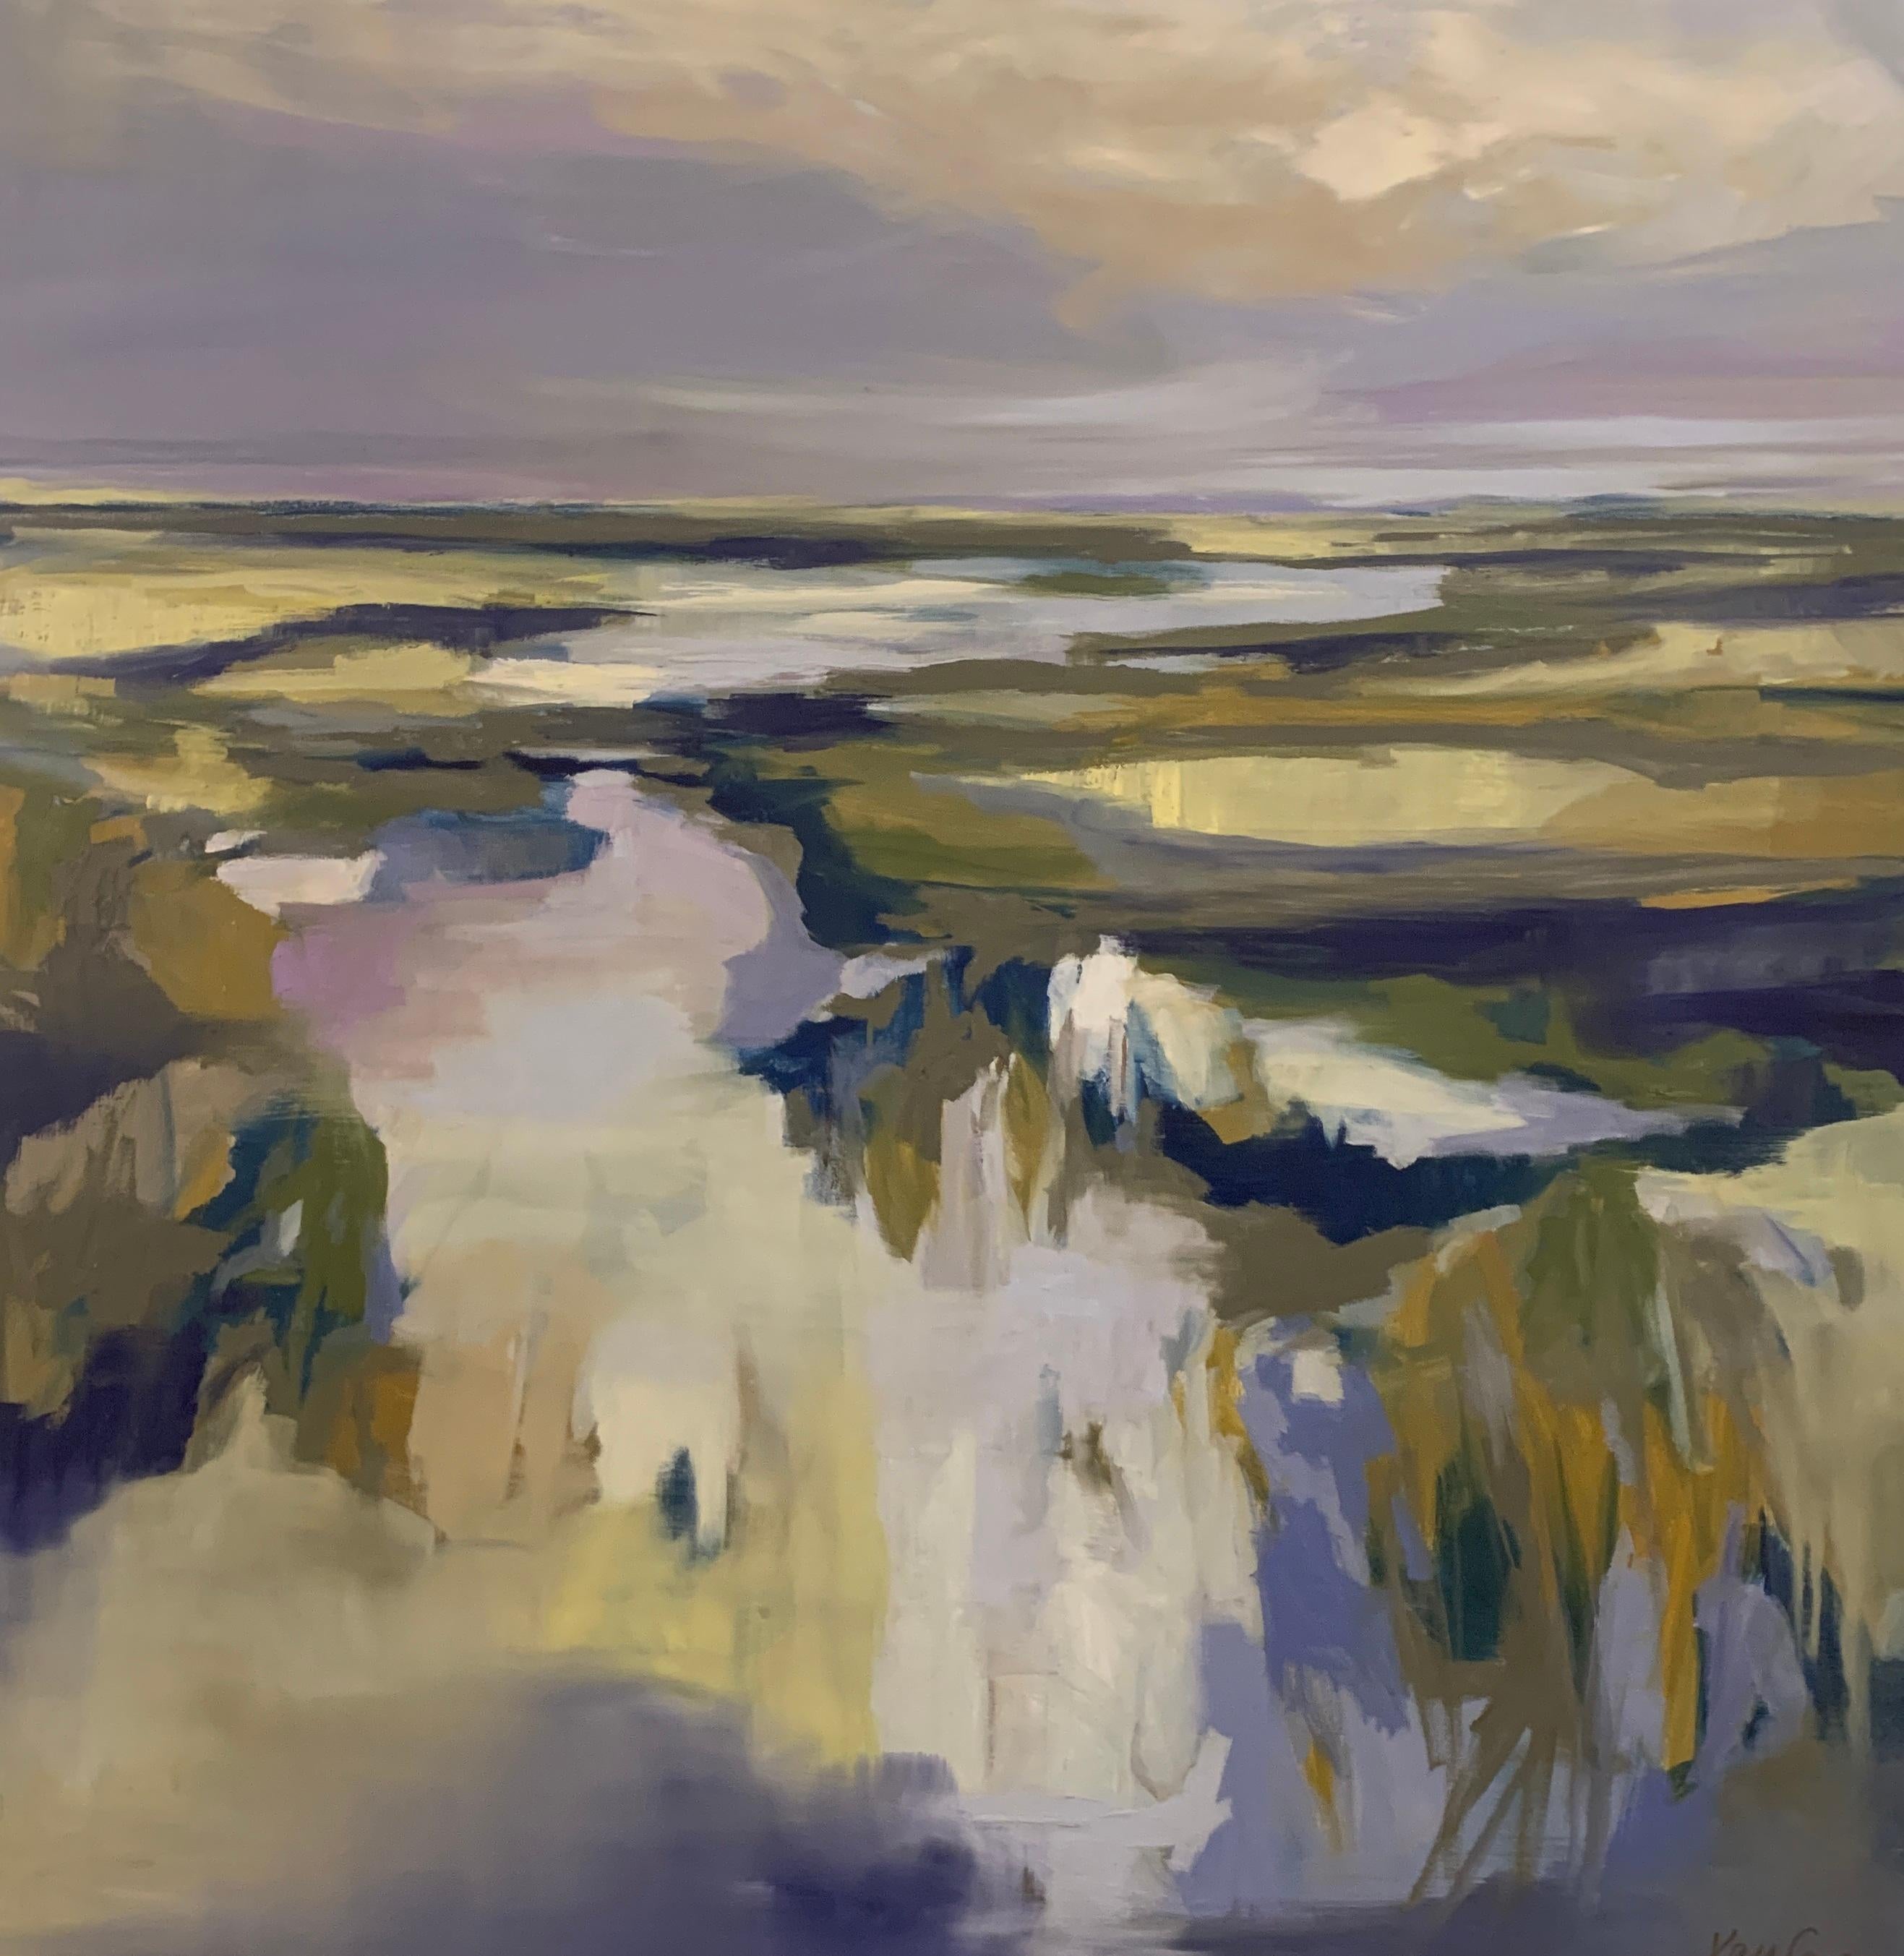 'Cloud Reflection' is a large framed oil and wax on canvas abstracted landscape created by American artist Kelli Kaufman in 2019. Featuring a palette mostly made of green, white and blue tonalities, this square format piece depicts a marsh on the